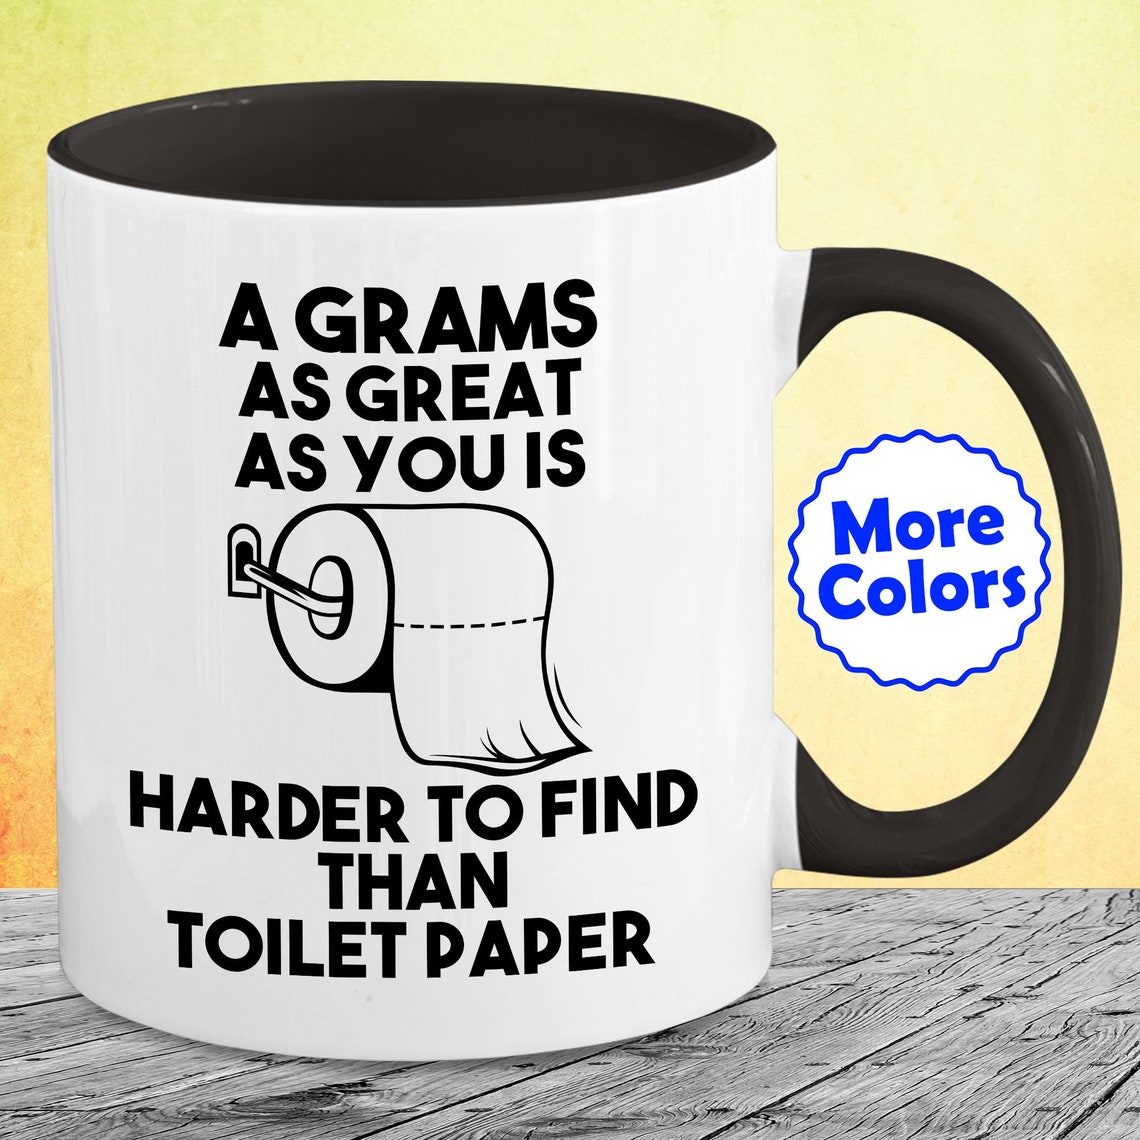 Grams Mug Coffee Cup Funny Gifts For Birthday Best Present